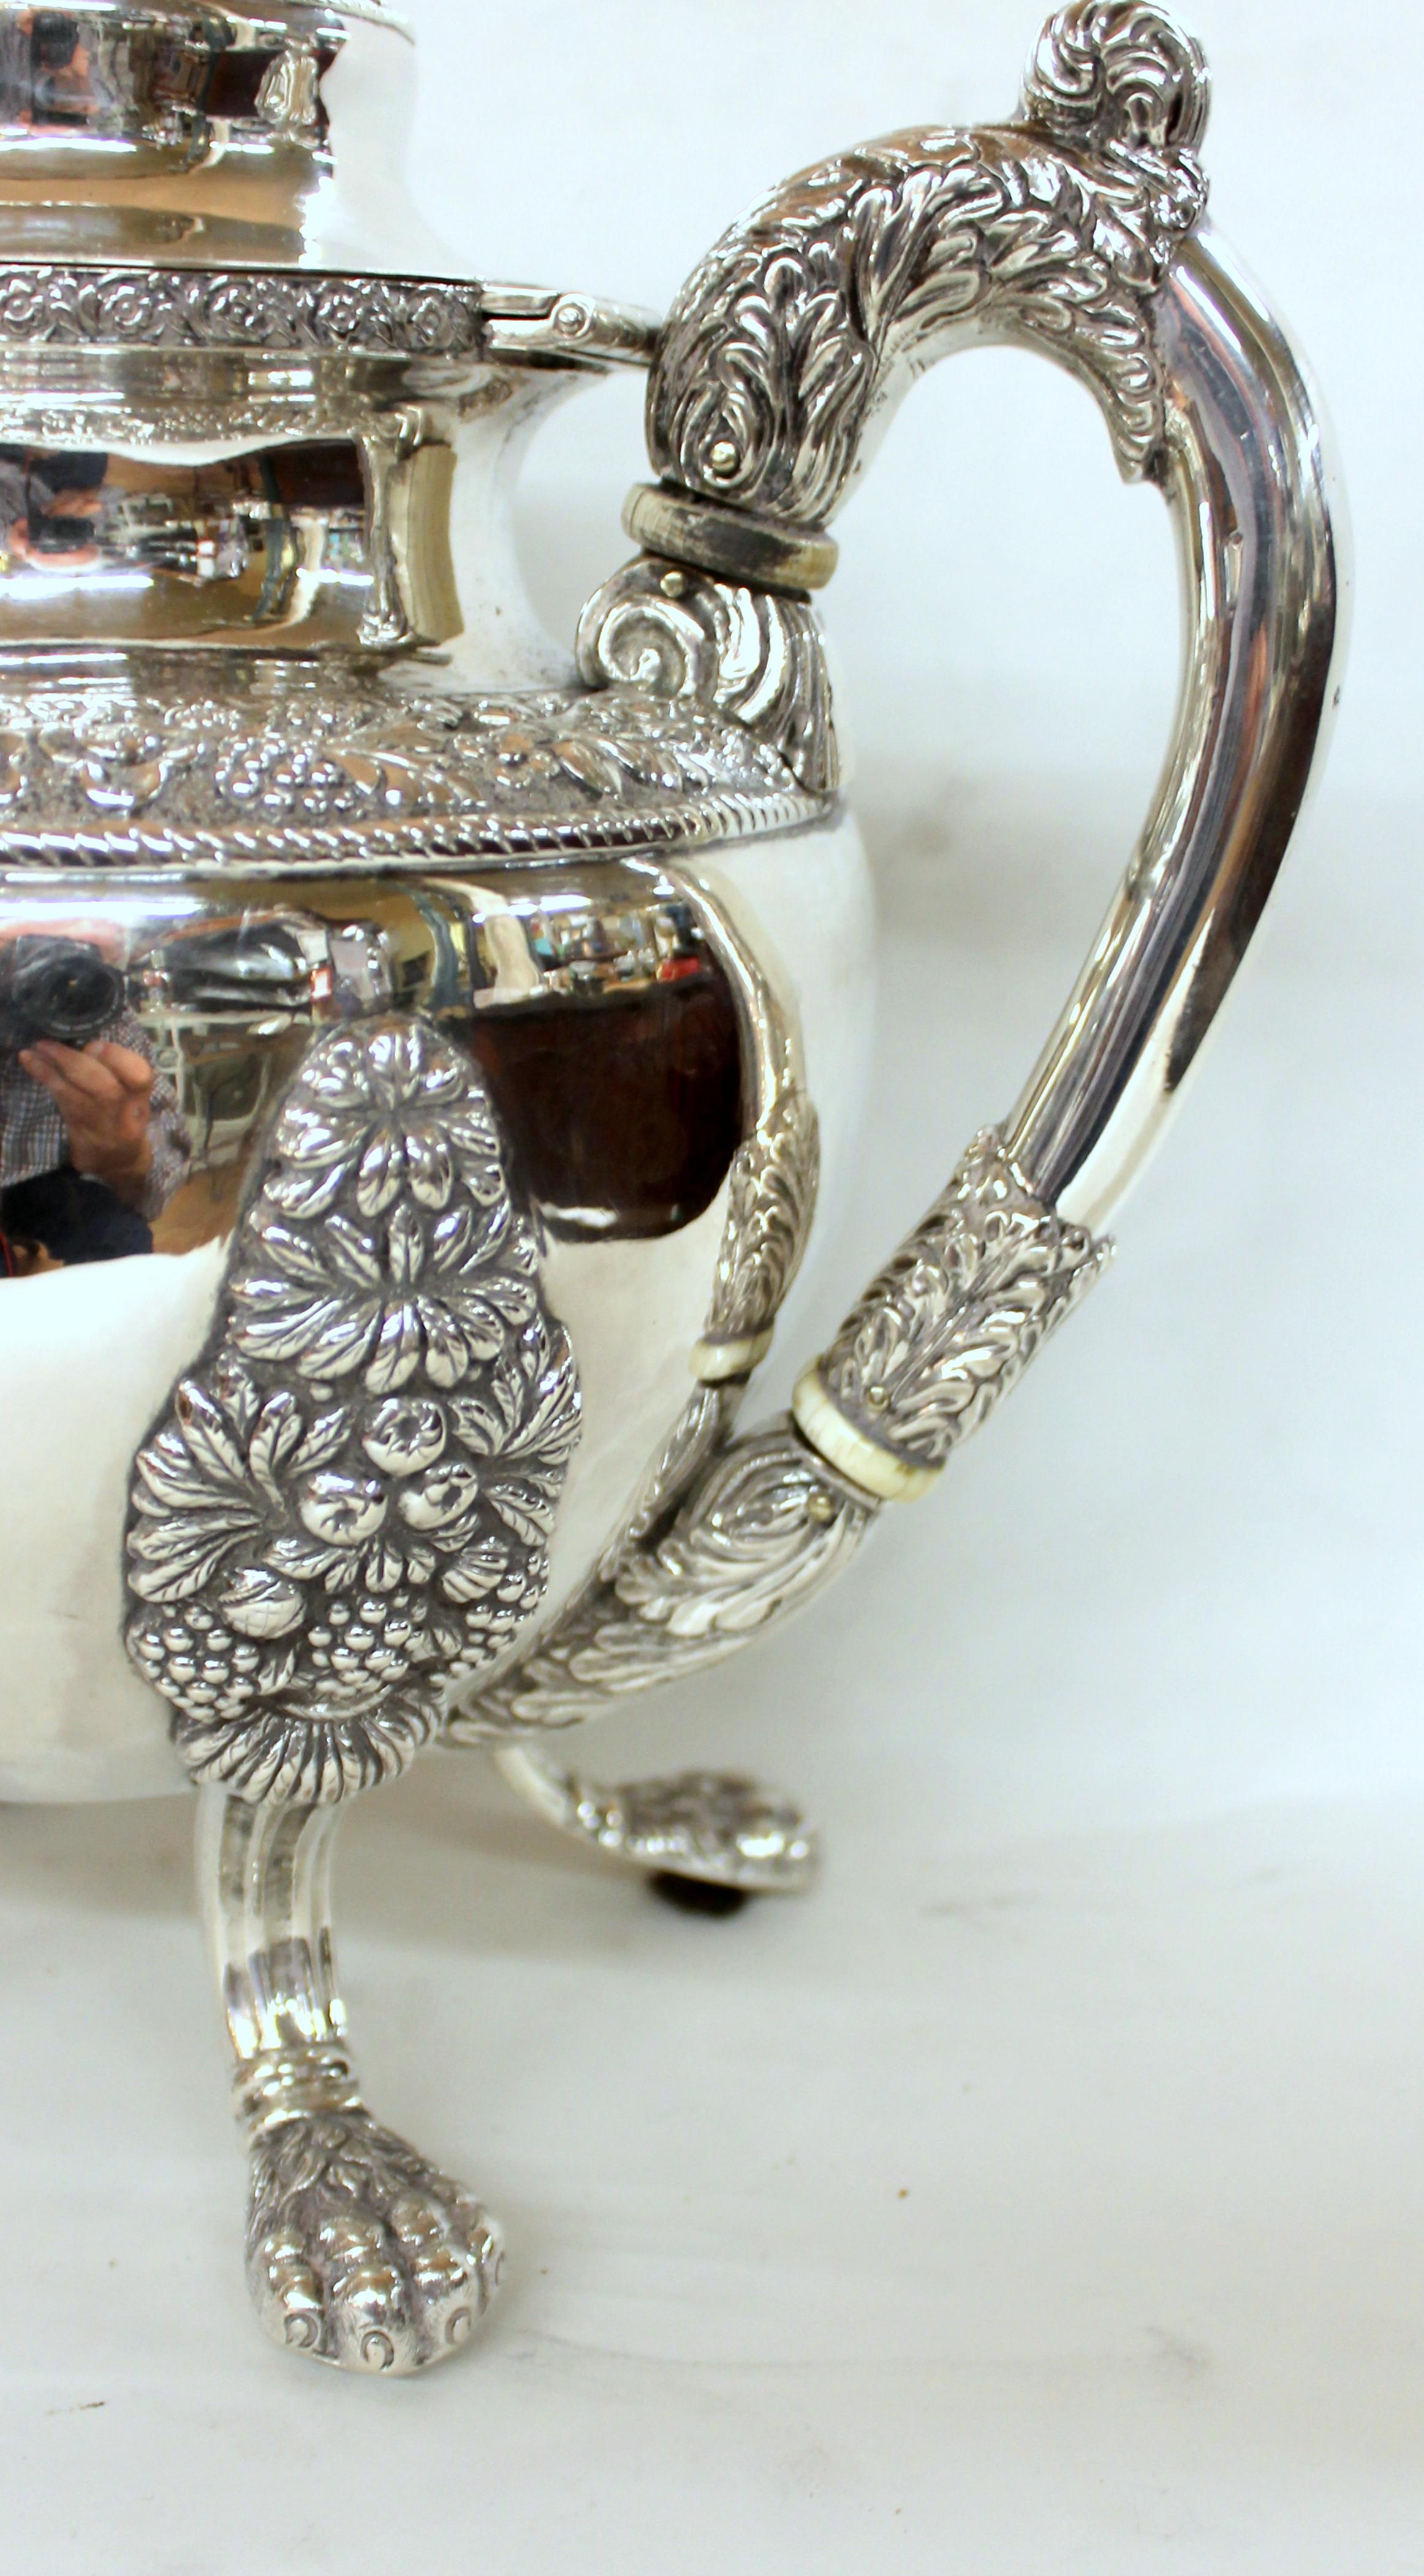 Hand-Crafted Antique American Coin Silver Rococo Style Four Piece Tea Set, Andrew de Milt, NY